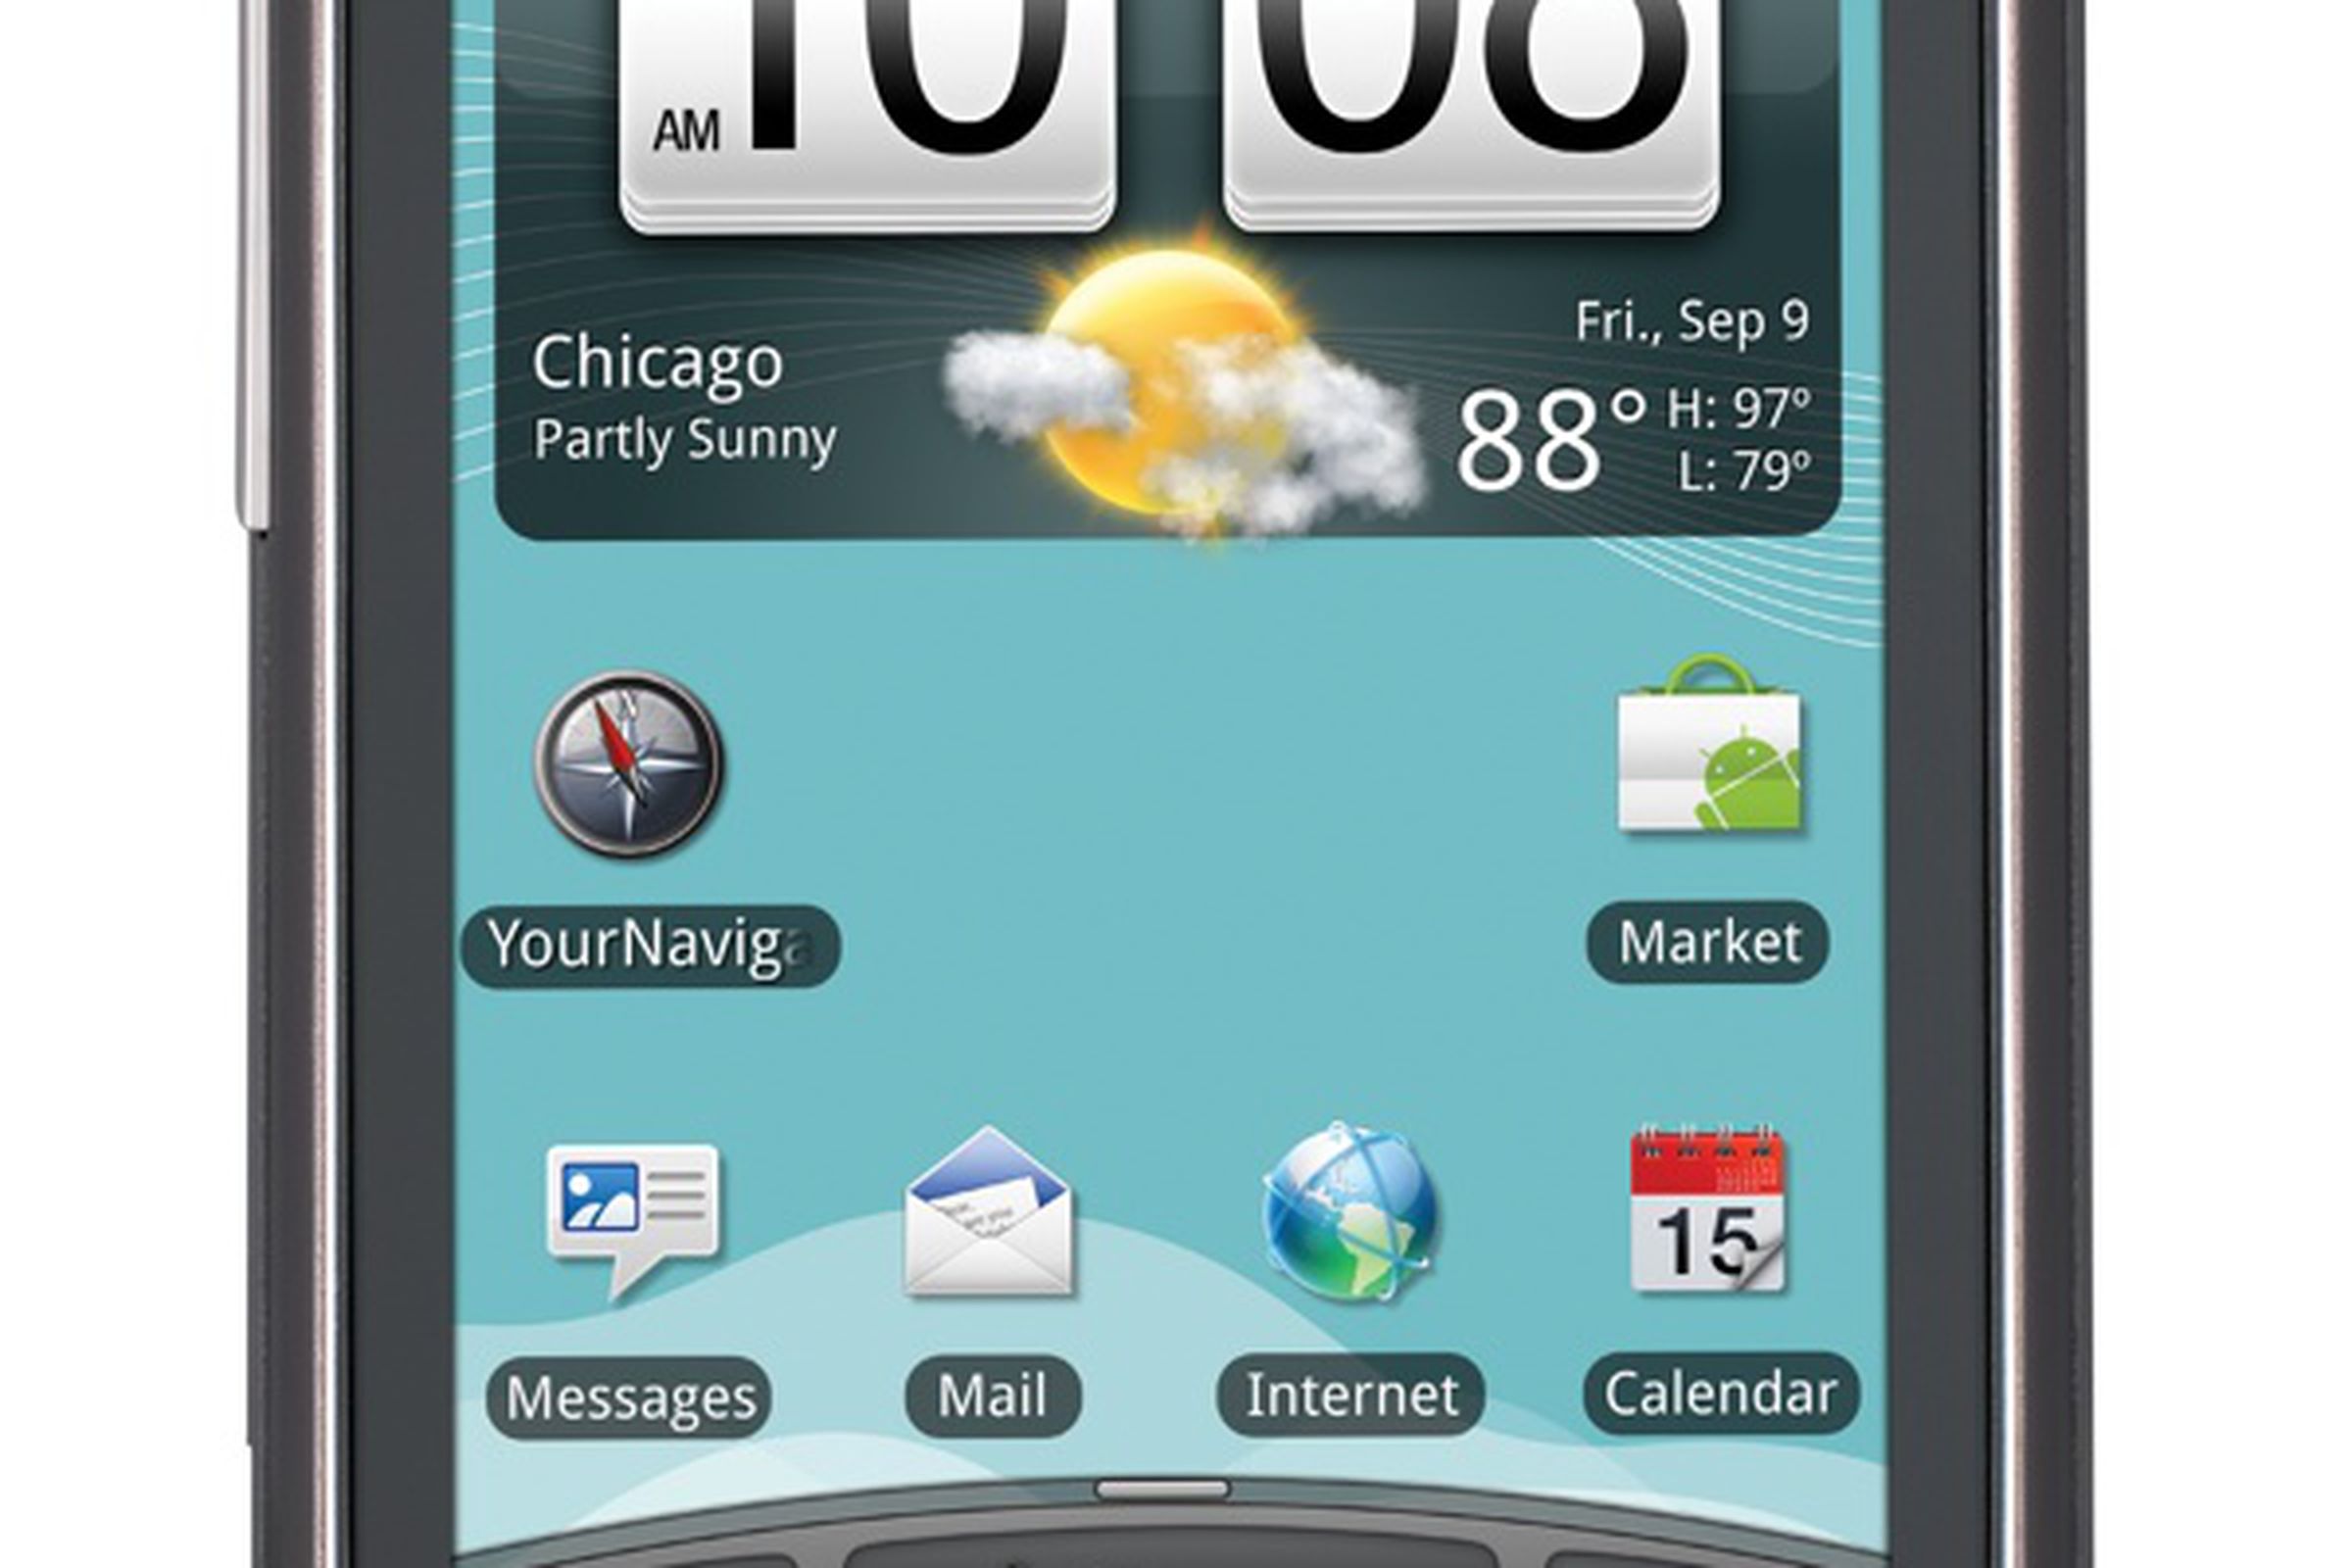 HTC Wildfire S on US Cellular